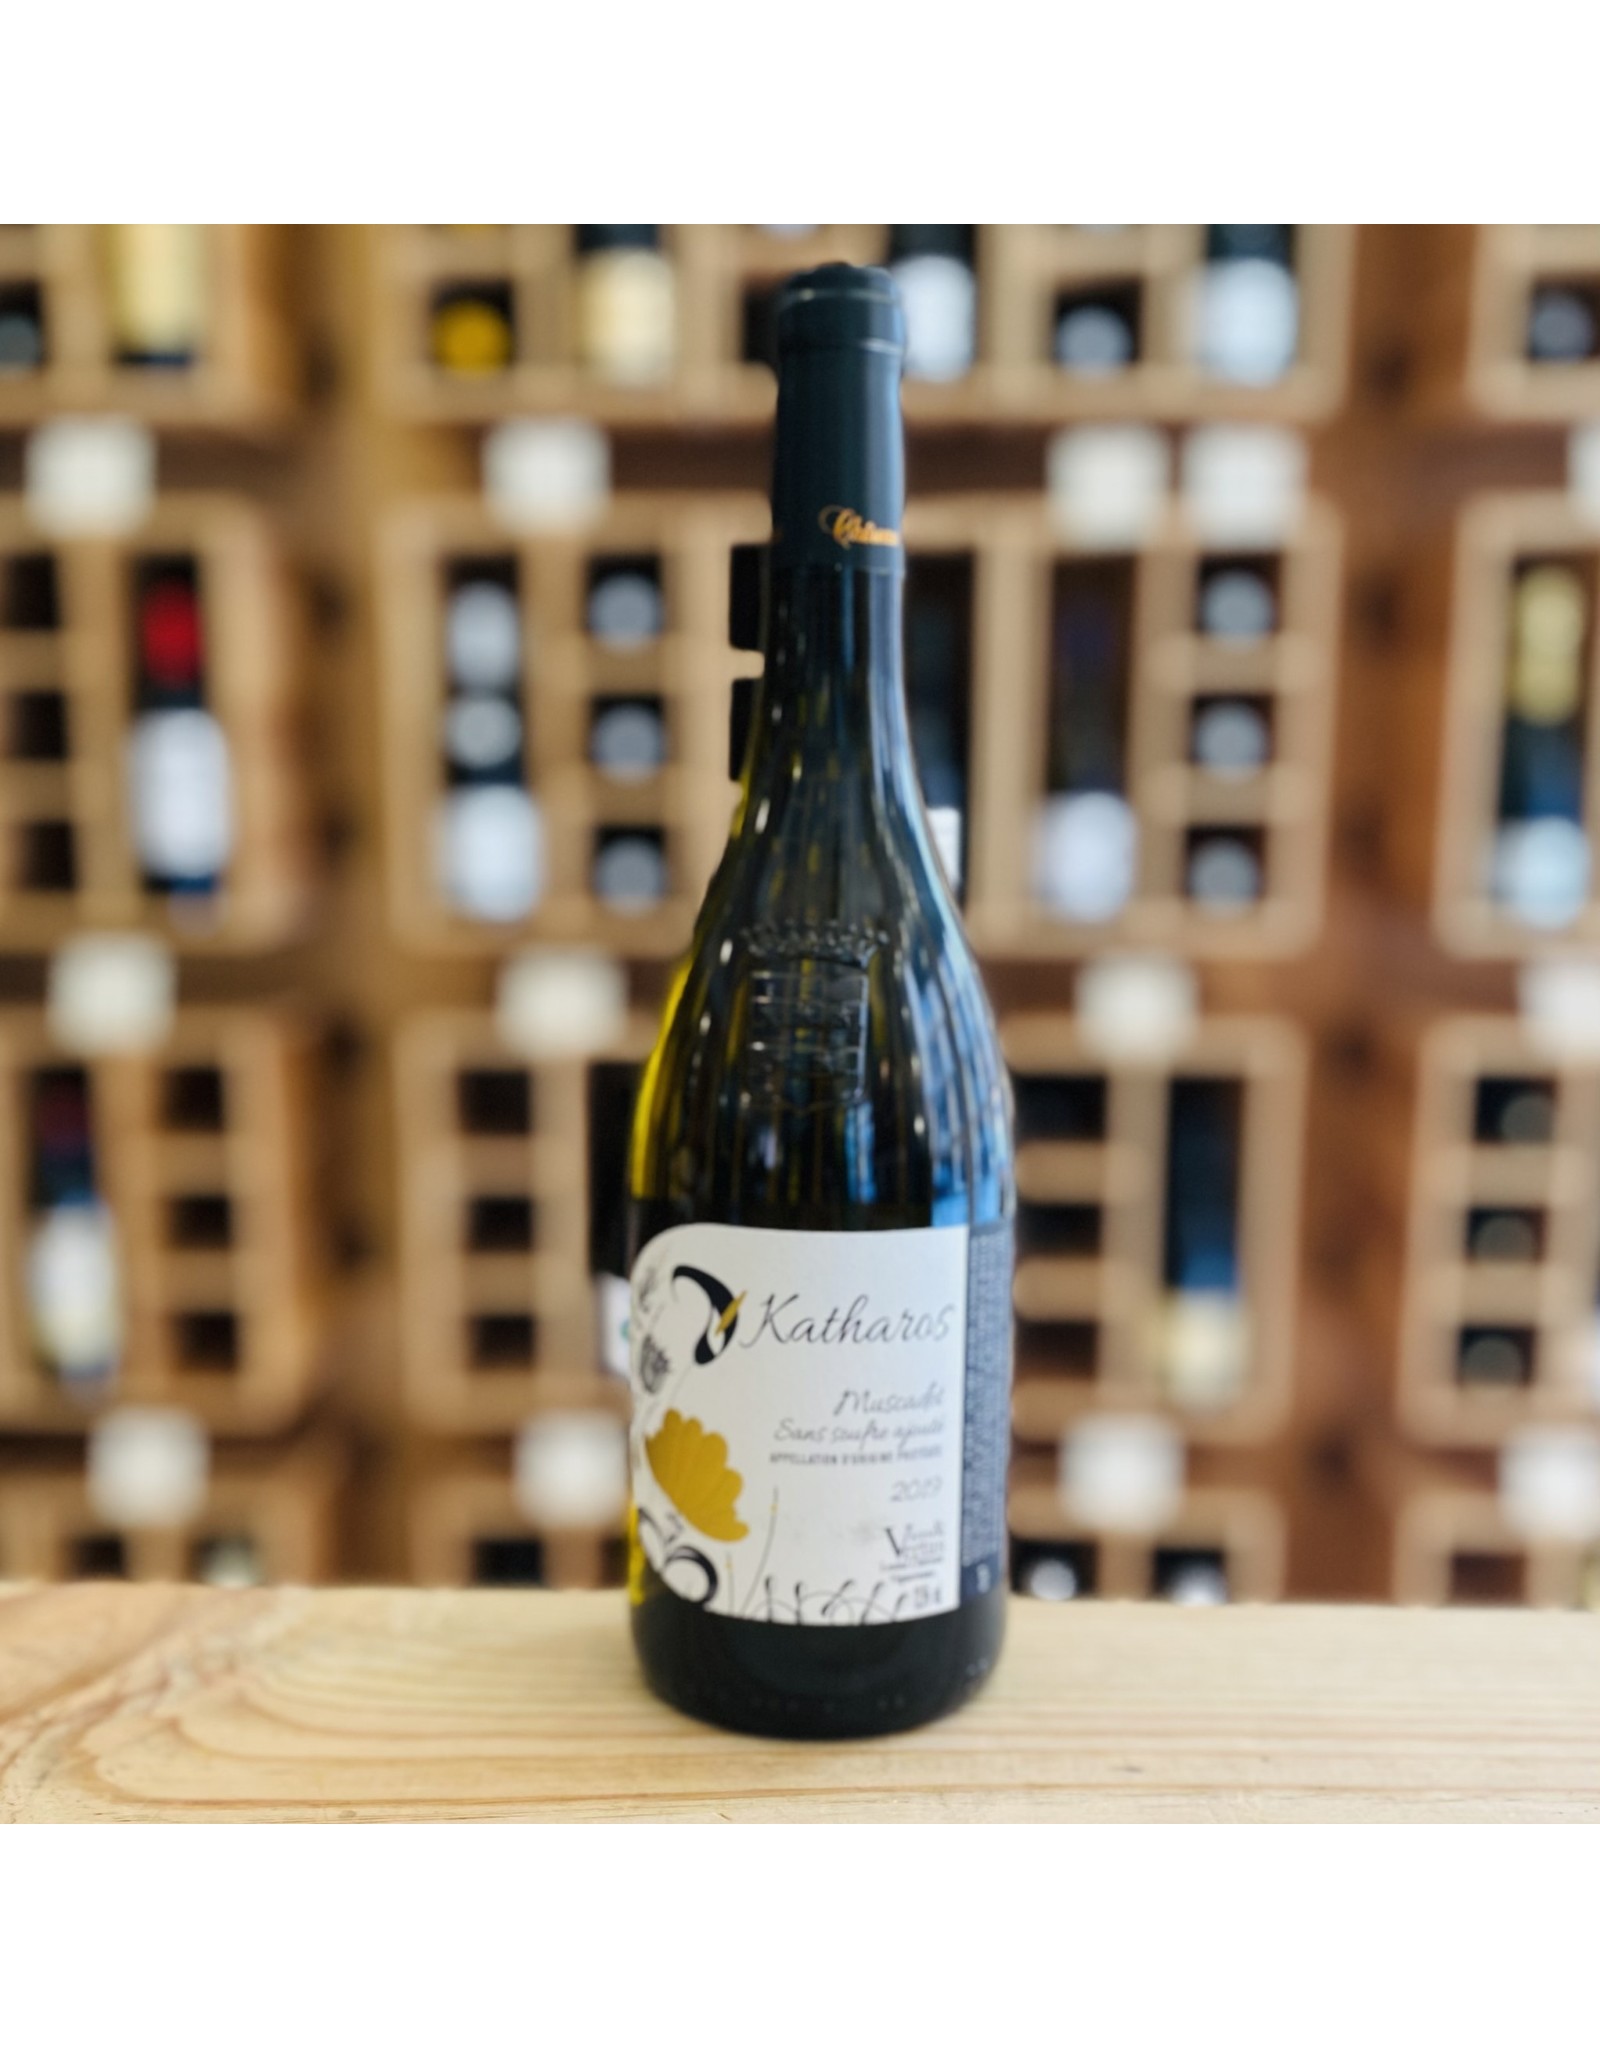 Loire Valley Chereau Carre "Katharos" Muscadet 2019 - Loire Valley, France